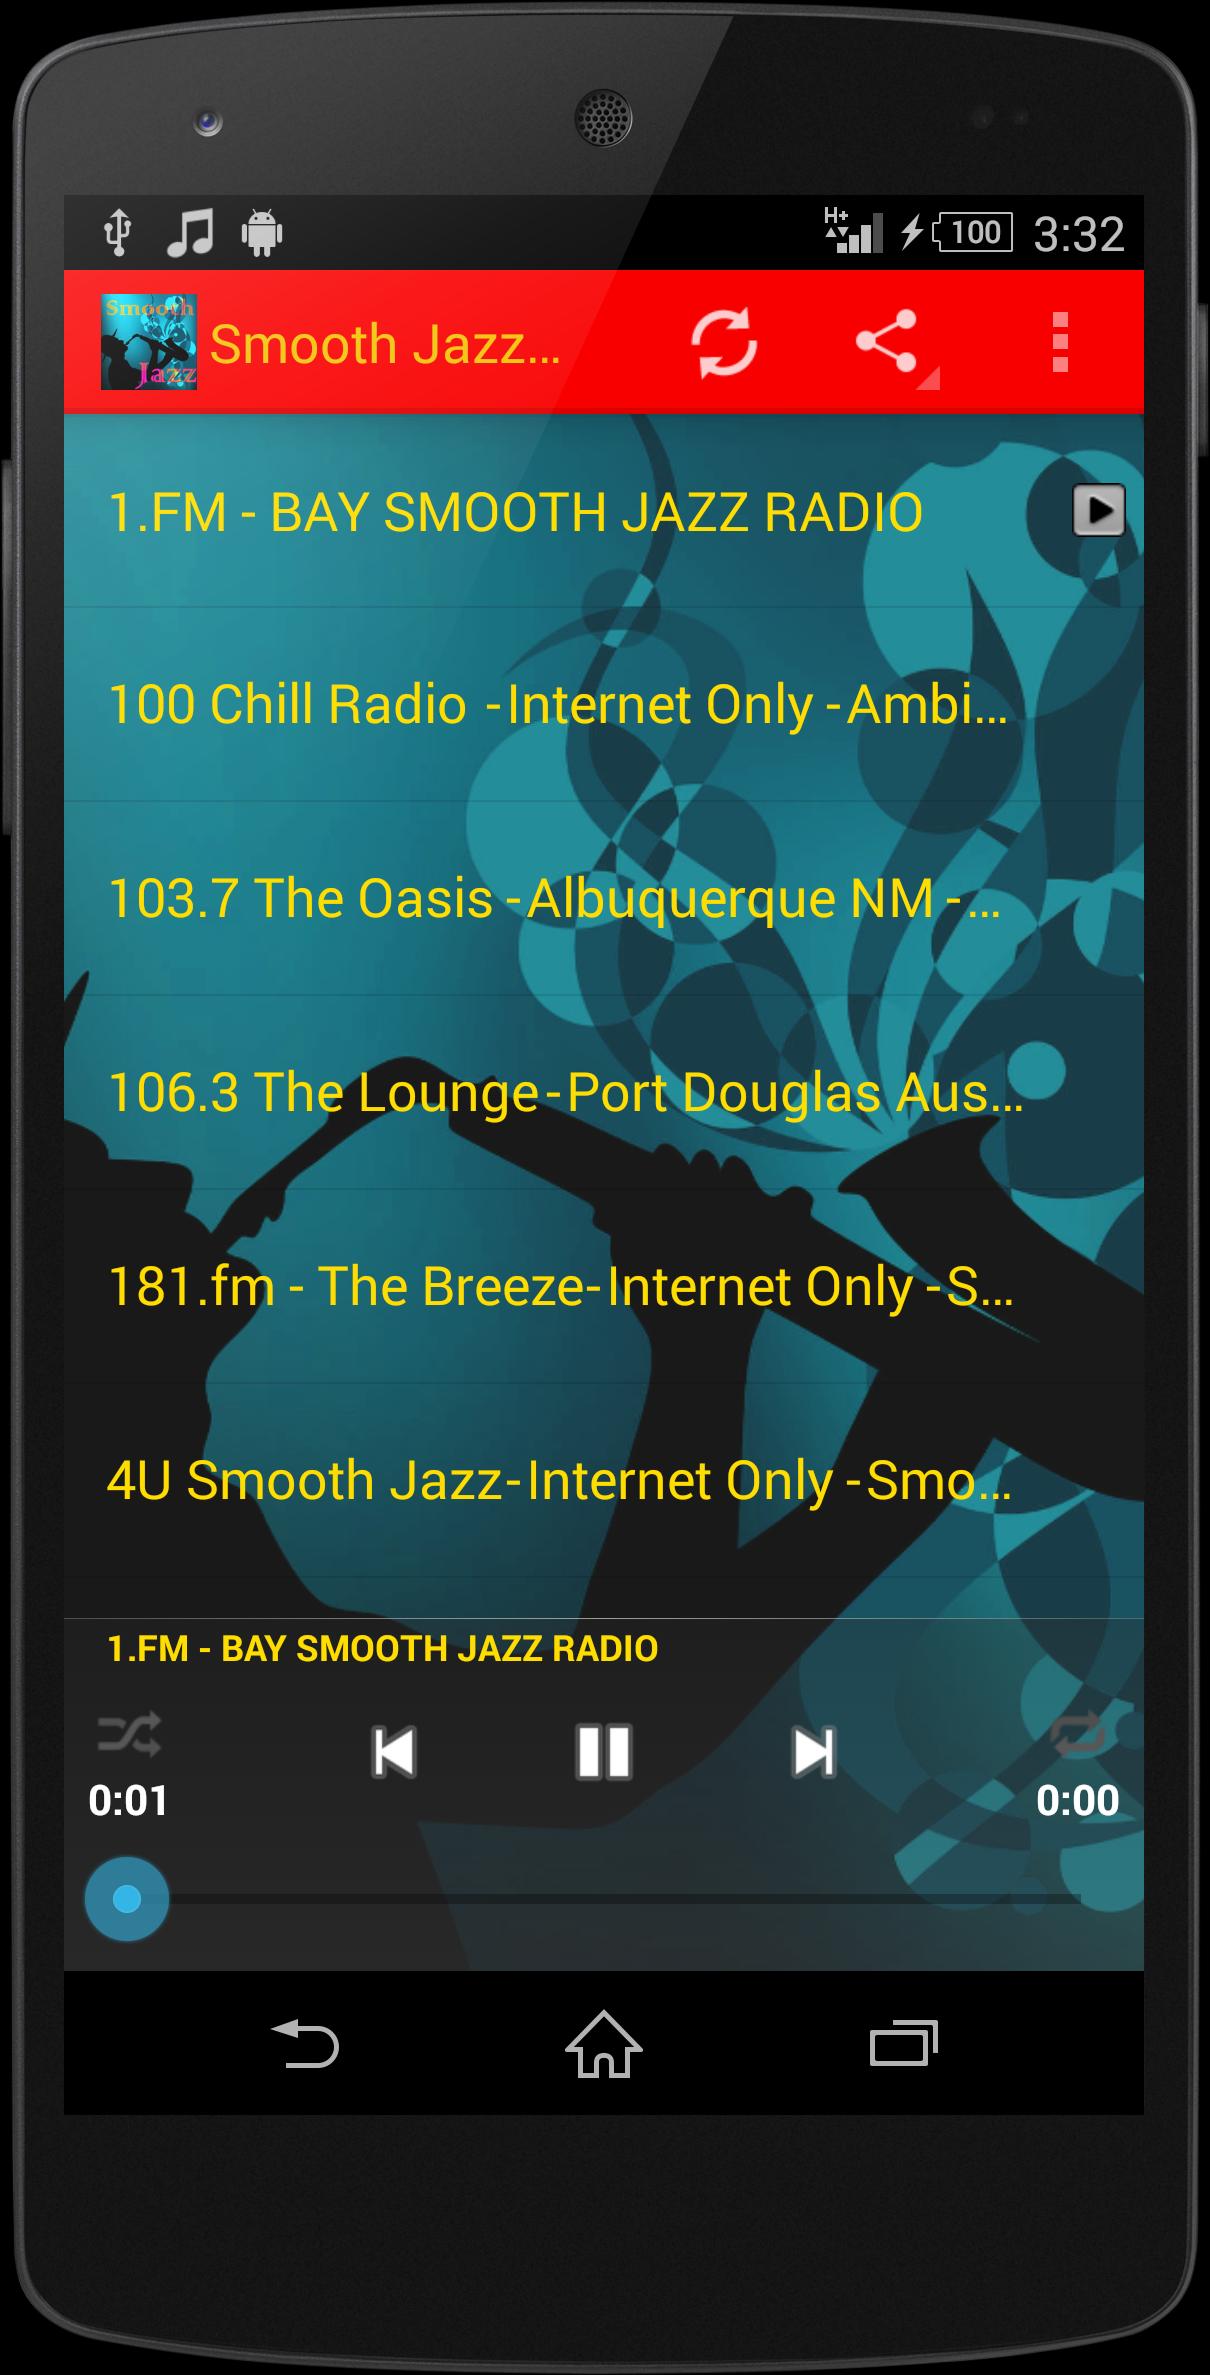 Smooth Jazz MUSIC Radio for Android - APK Download